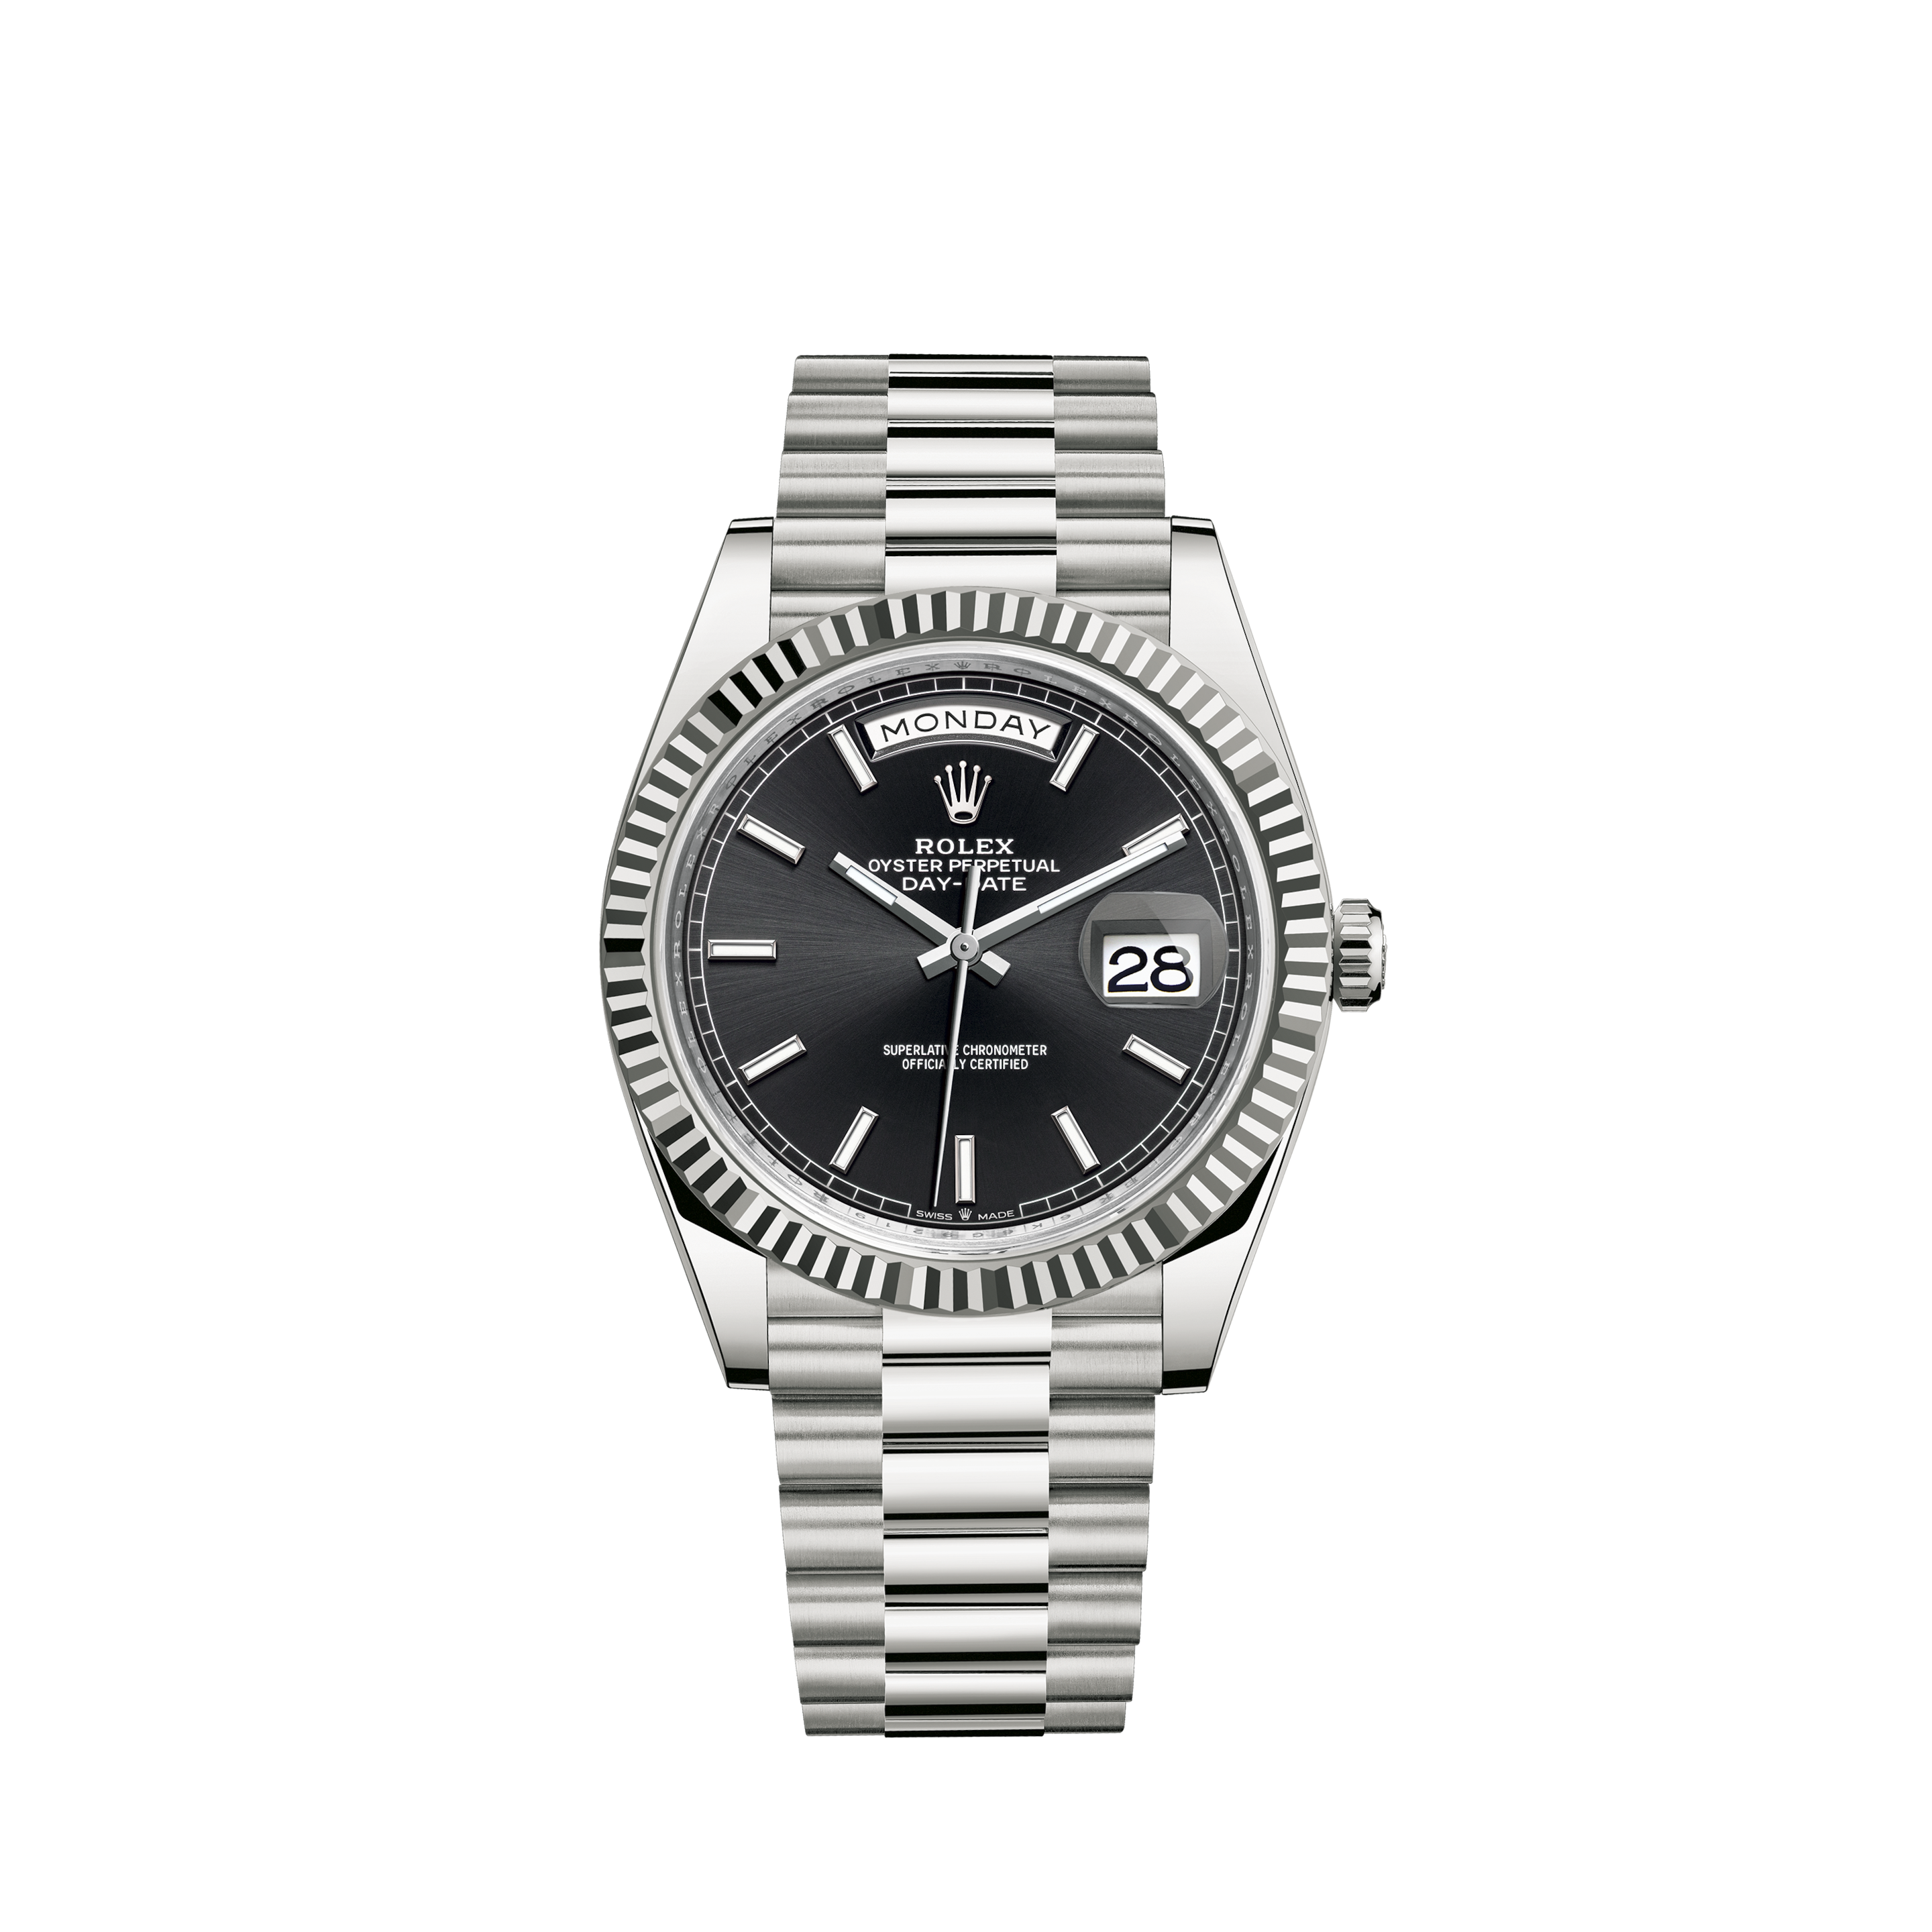 Rolex Sea-Dweller 44mm Stainless Steel Black Dial Mens Automatic Watch 116660Rolex Ladies Customized Rolex watch 26mm Datejust Stainless Steel Silver Color String Diamond Accent Dial